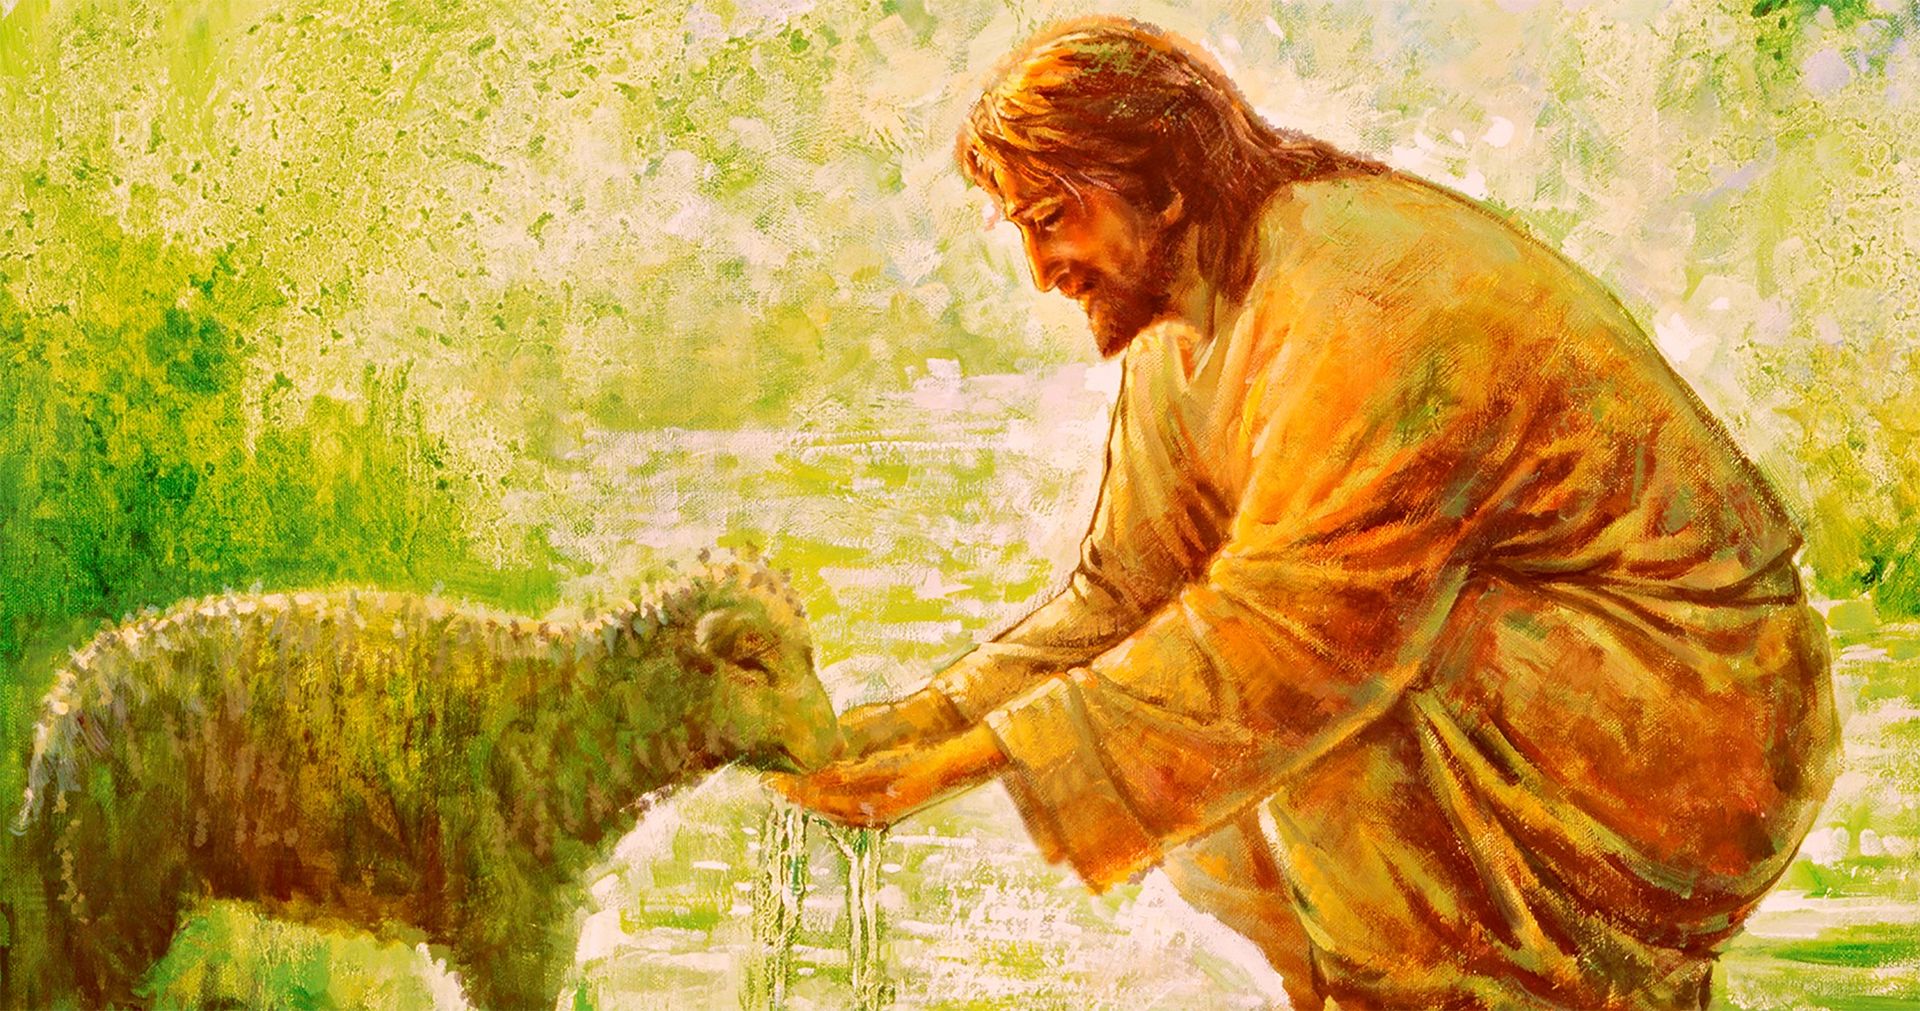 Christ gives water to a thirsty lamb.